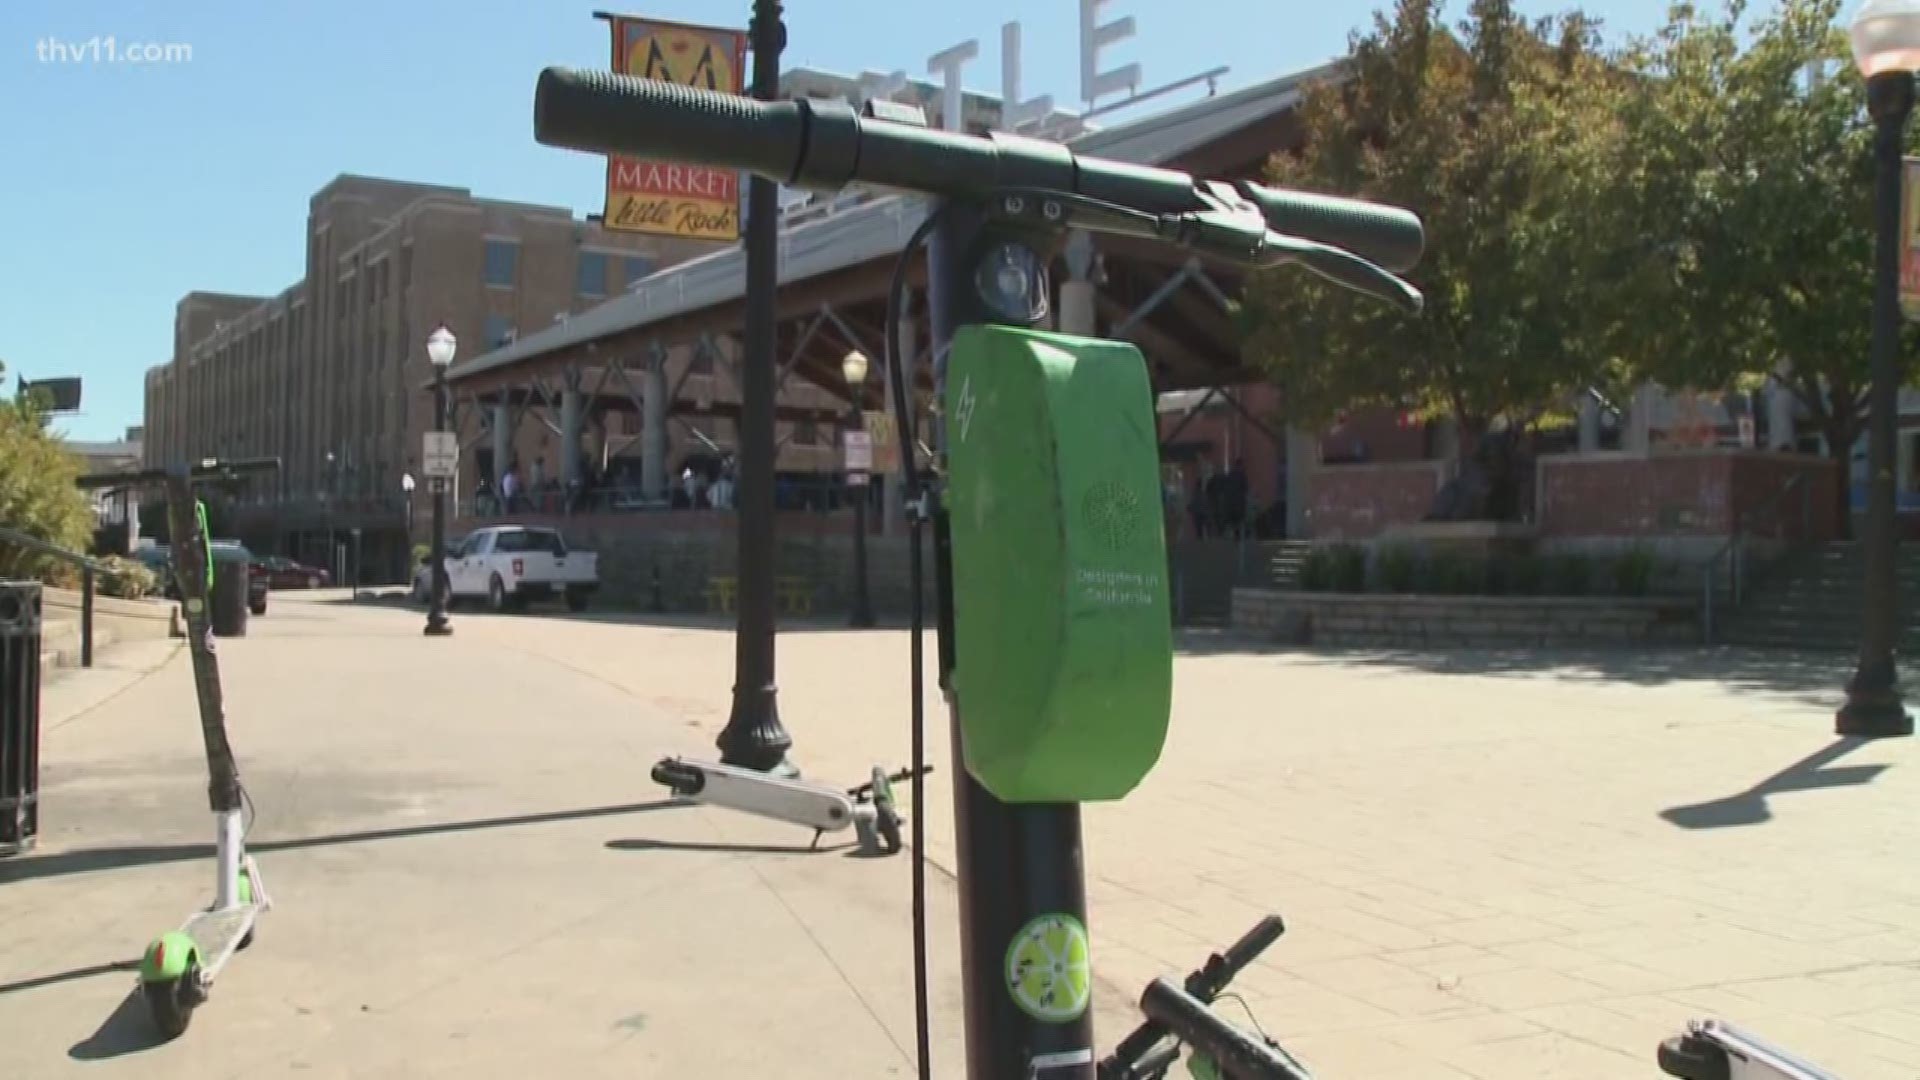 Many would agree that Lime scooters can be pretty useful and fun, but they must also be taken very seriously. If not, you can really get hurt.